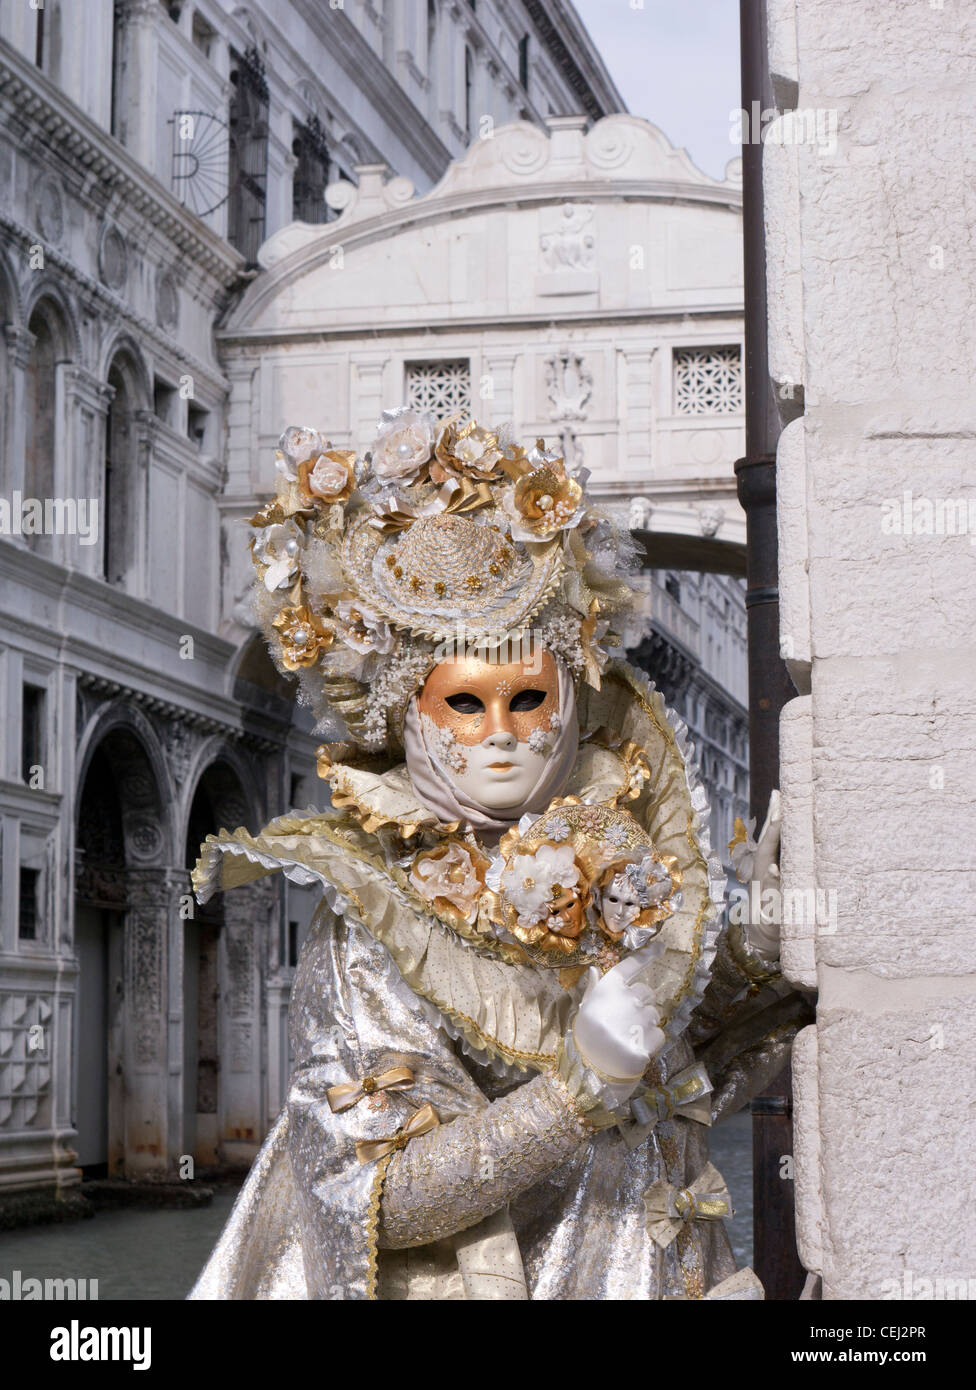 Masked woman in Carnival or Carnevale in Venice Italy Stock Photo